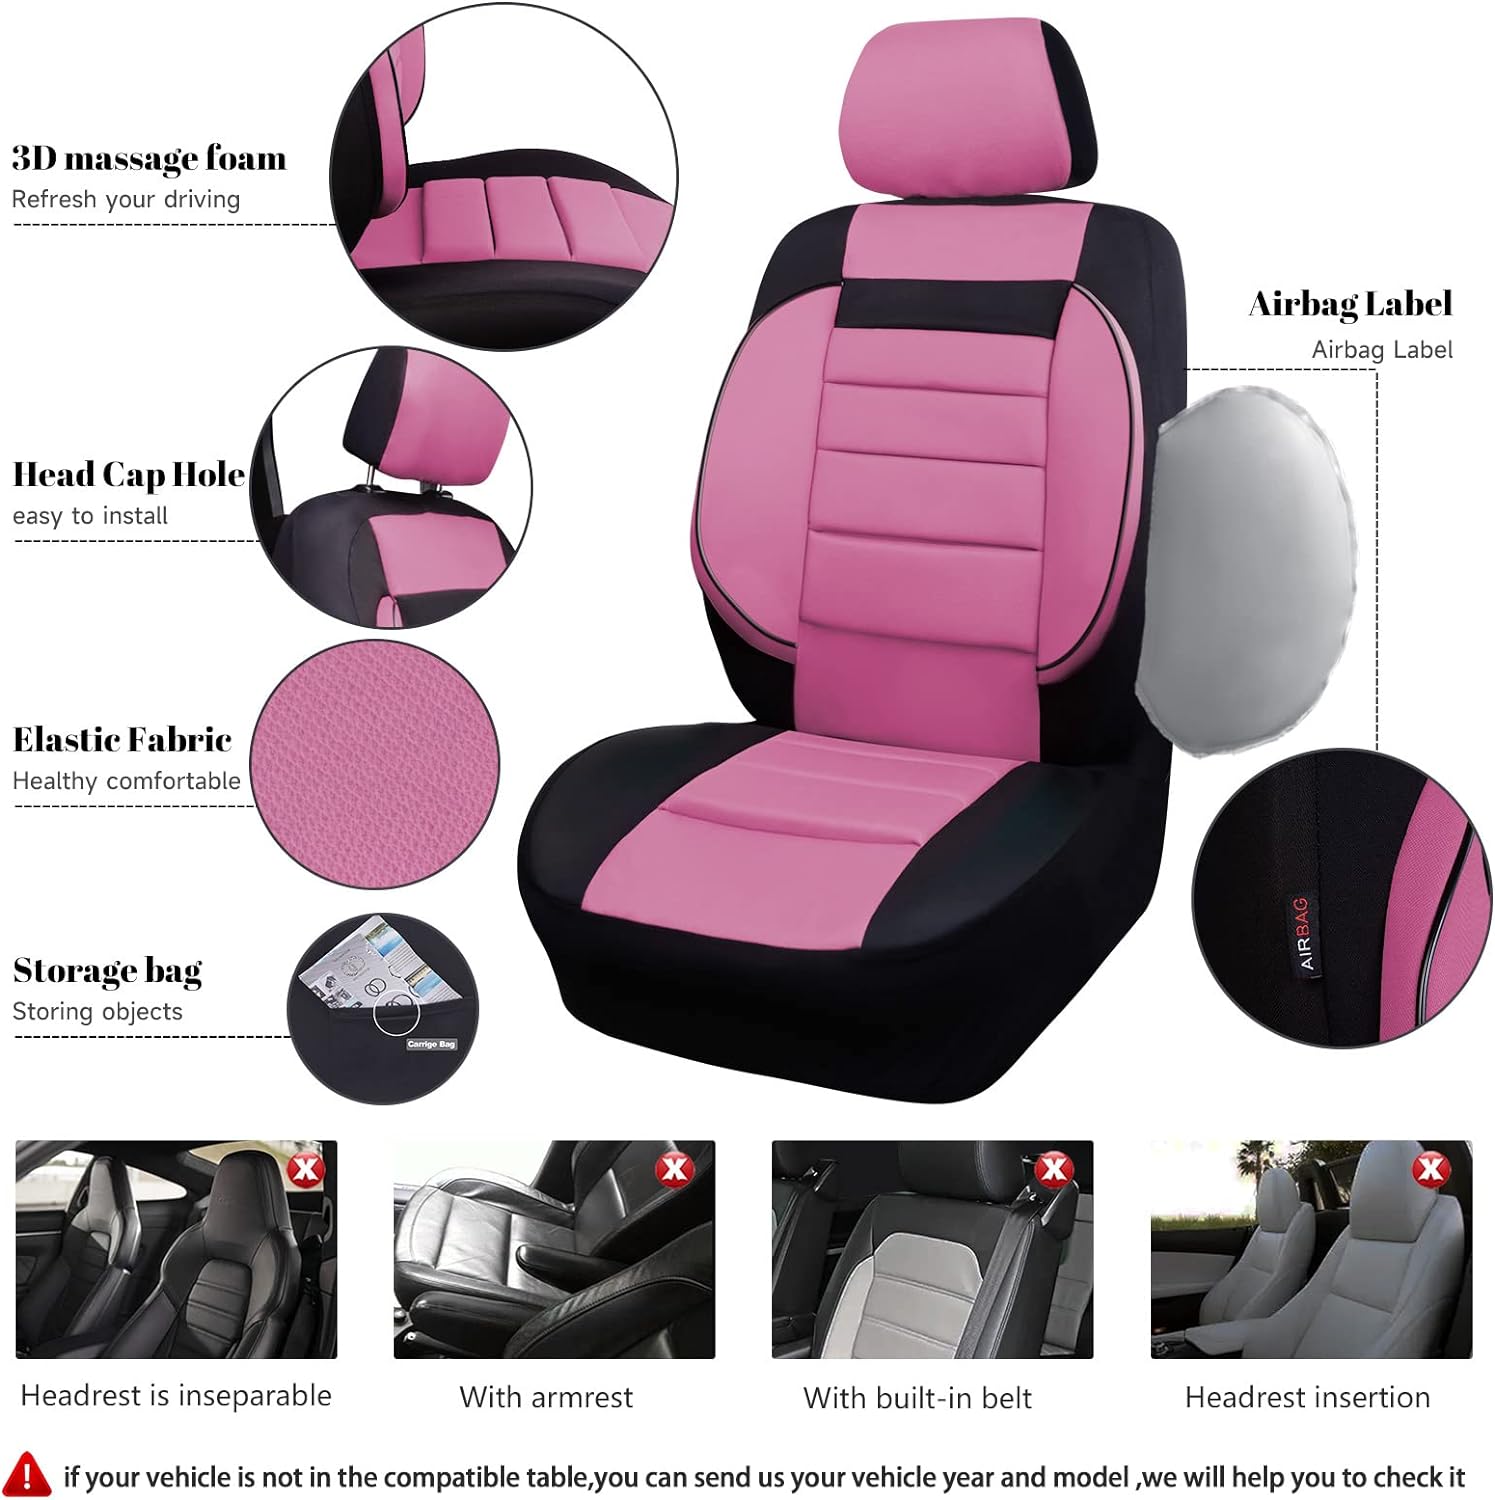 CAR PASS 6PCS 3D Foam Cushion Back Support Universal Fit Elegance Car Seat Covers Front Seats Only & Car Mats for Automotive SUV,Van,saden,Trucks Airbag Compatible